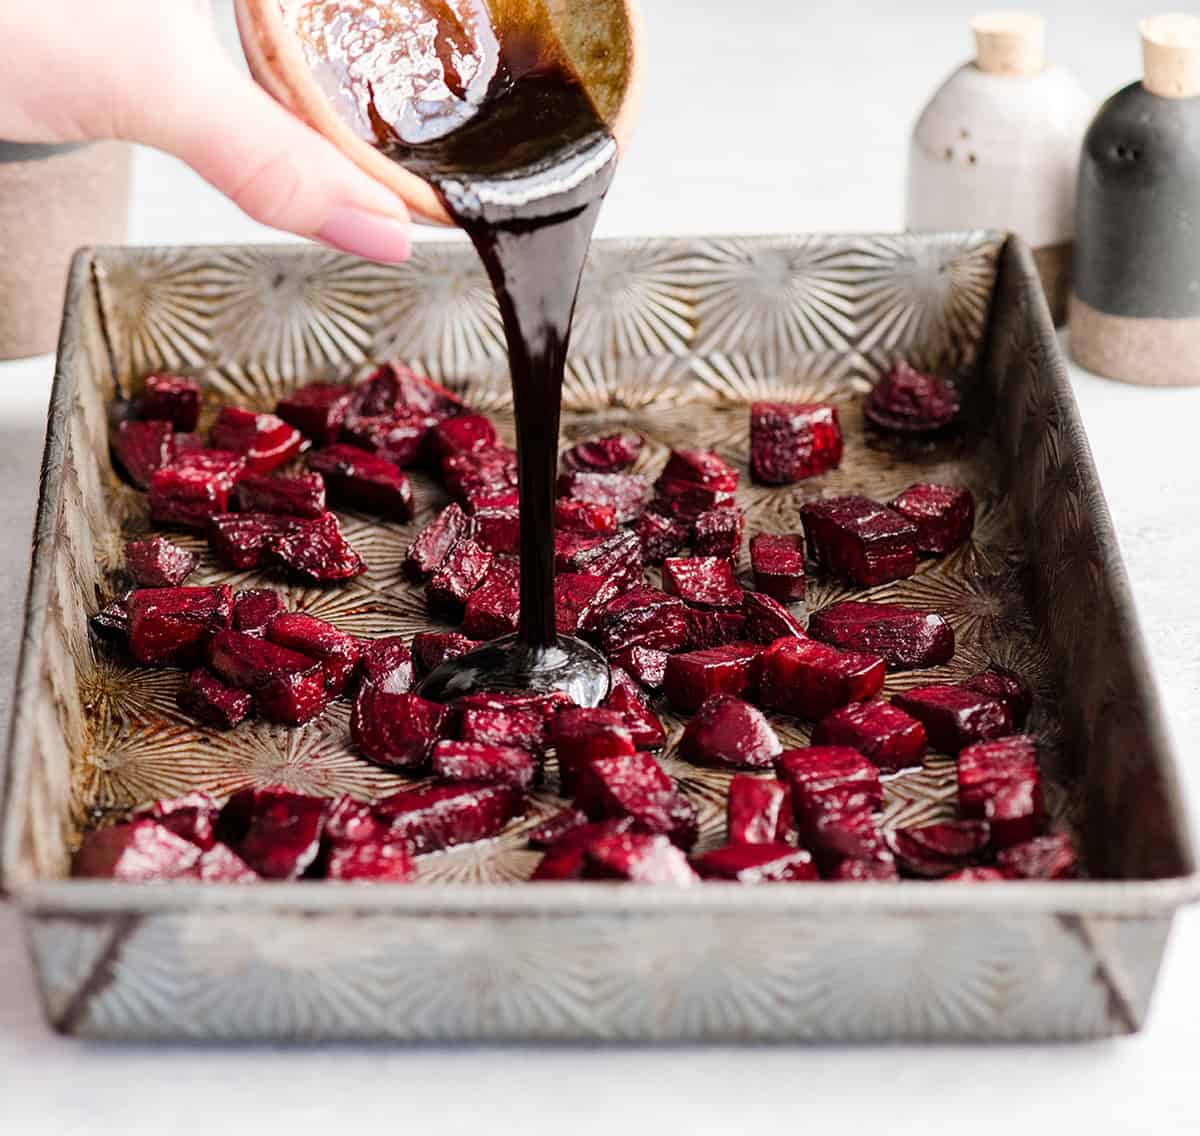 photo showing How to Roast Beets pouring balsamic vinegar on the partially roasted beets in a pan